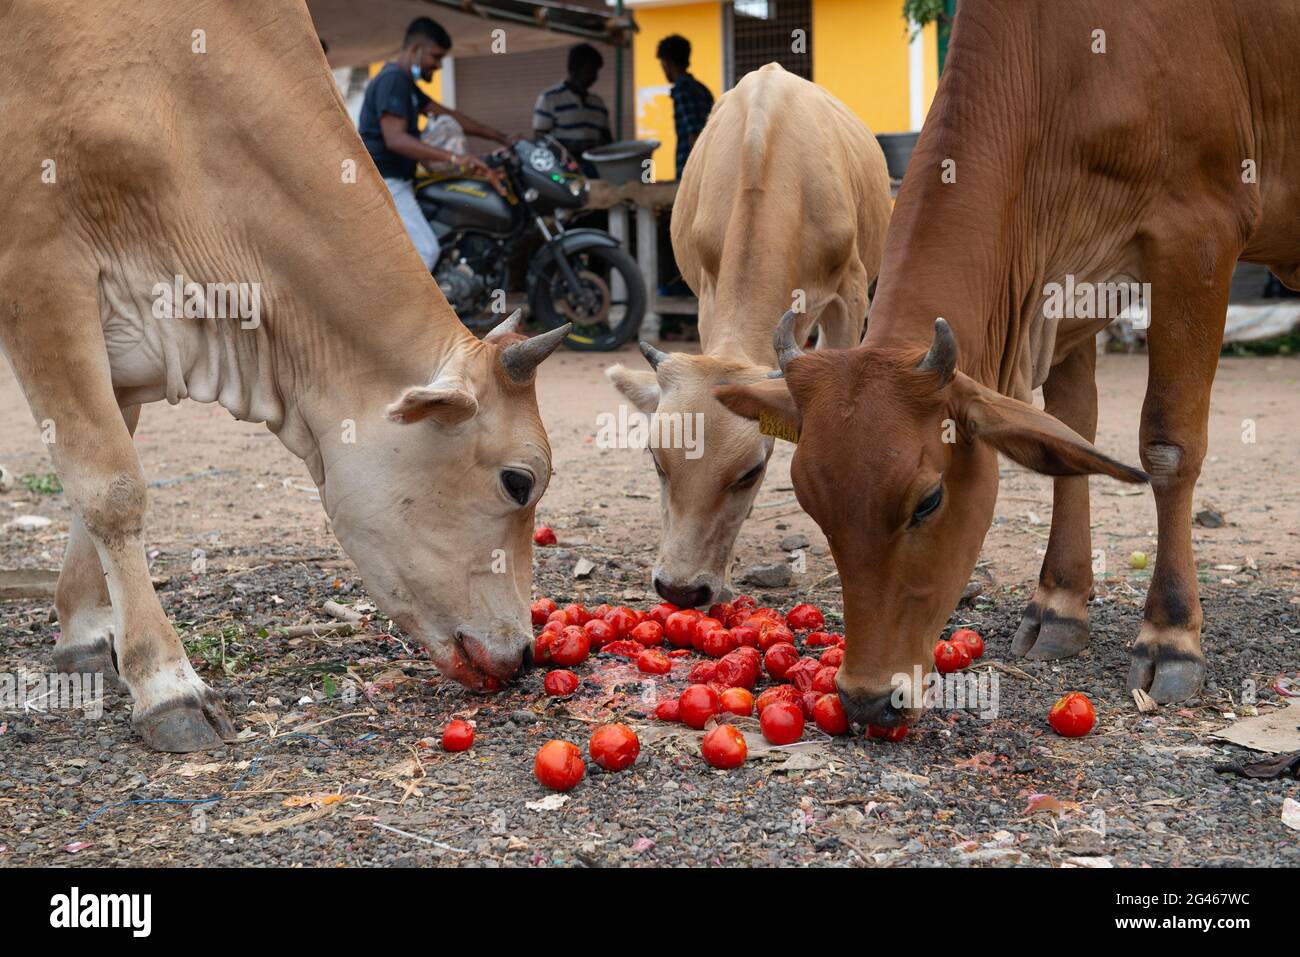 PONDICHERRY, INDIA - June 2021: Cows eating tomatoes thrown away in a street market. Stock Photo